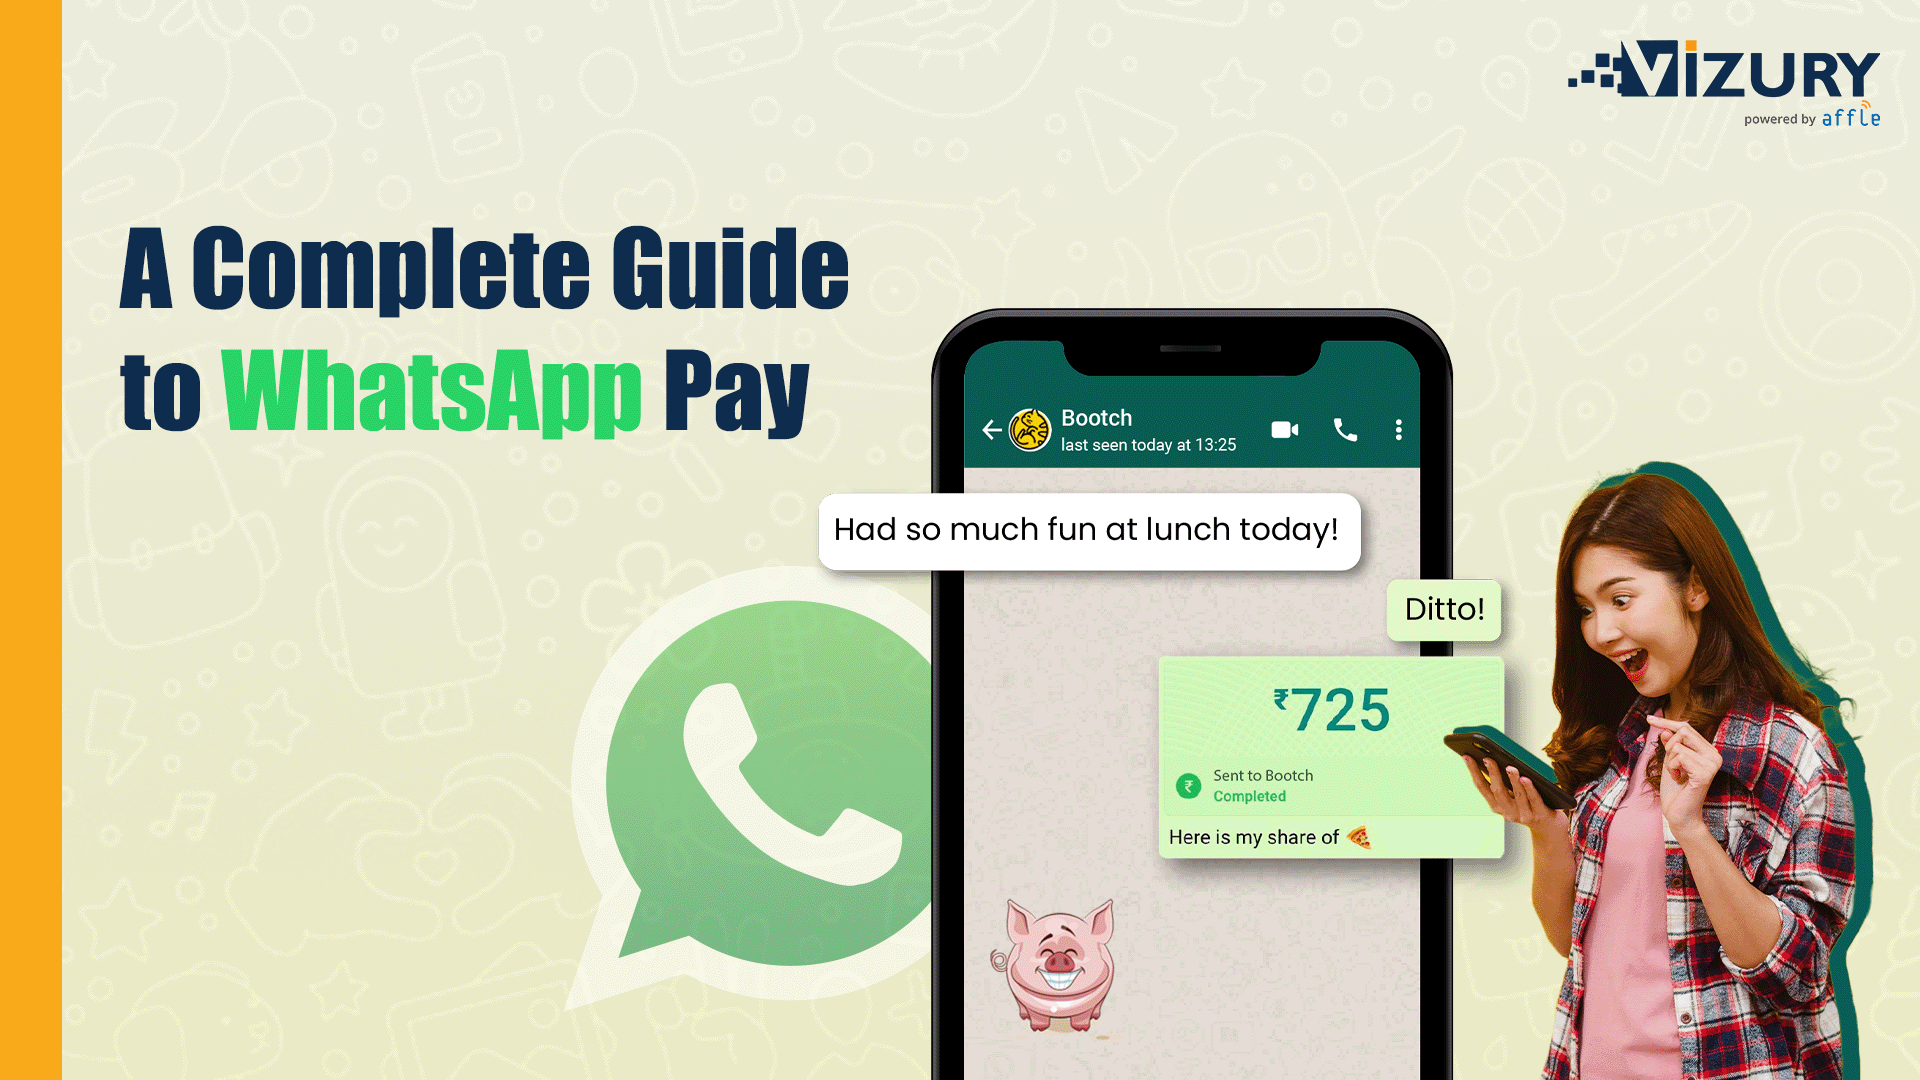 A Complete Guide to WhatsApp Pay